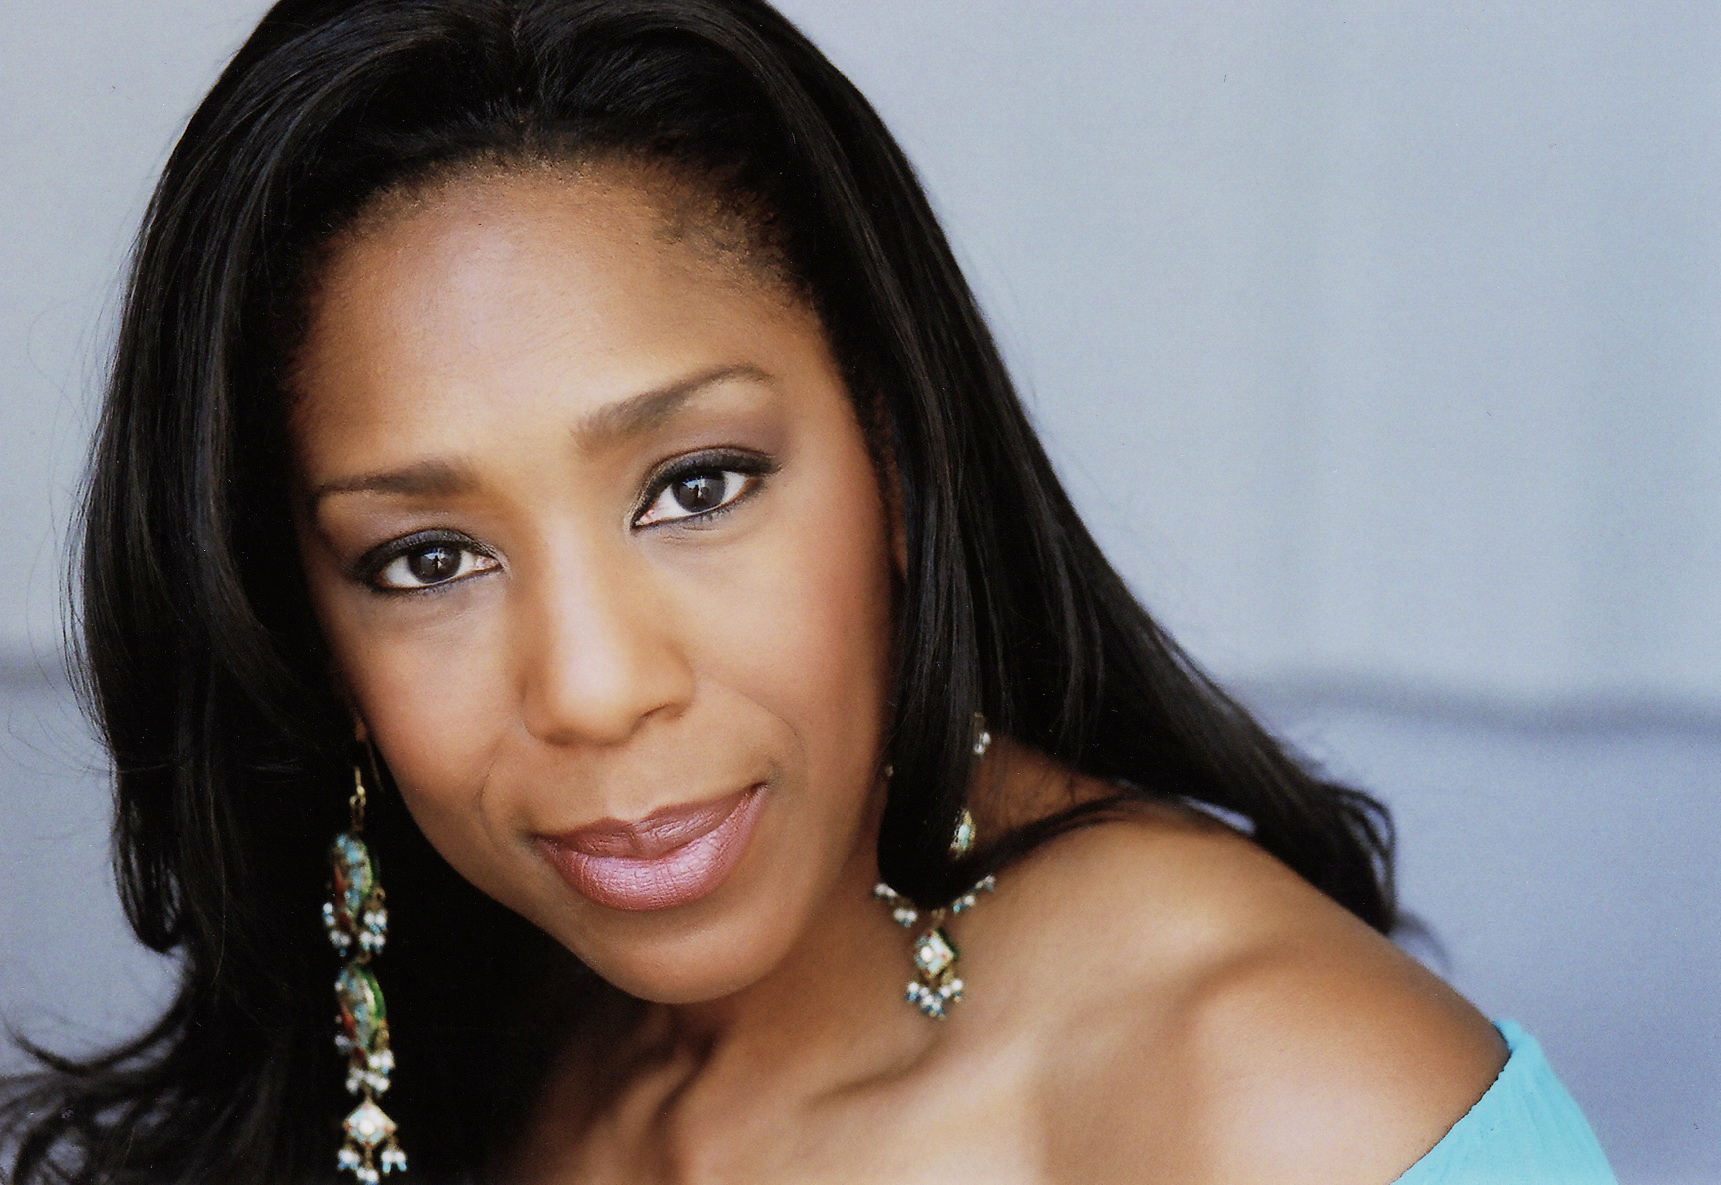 The beautiful actress and GRAMMY award winning singer, Dawnn Lewis is just ...